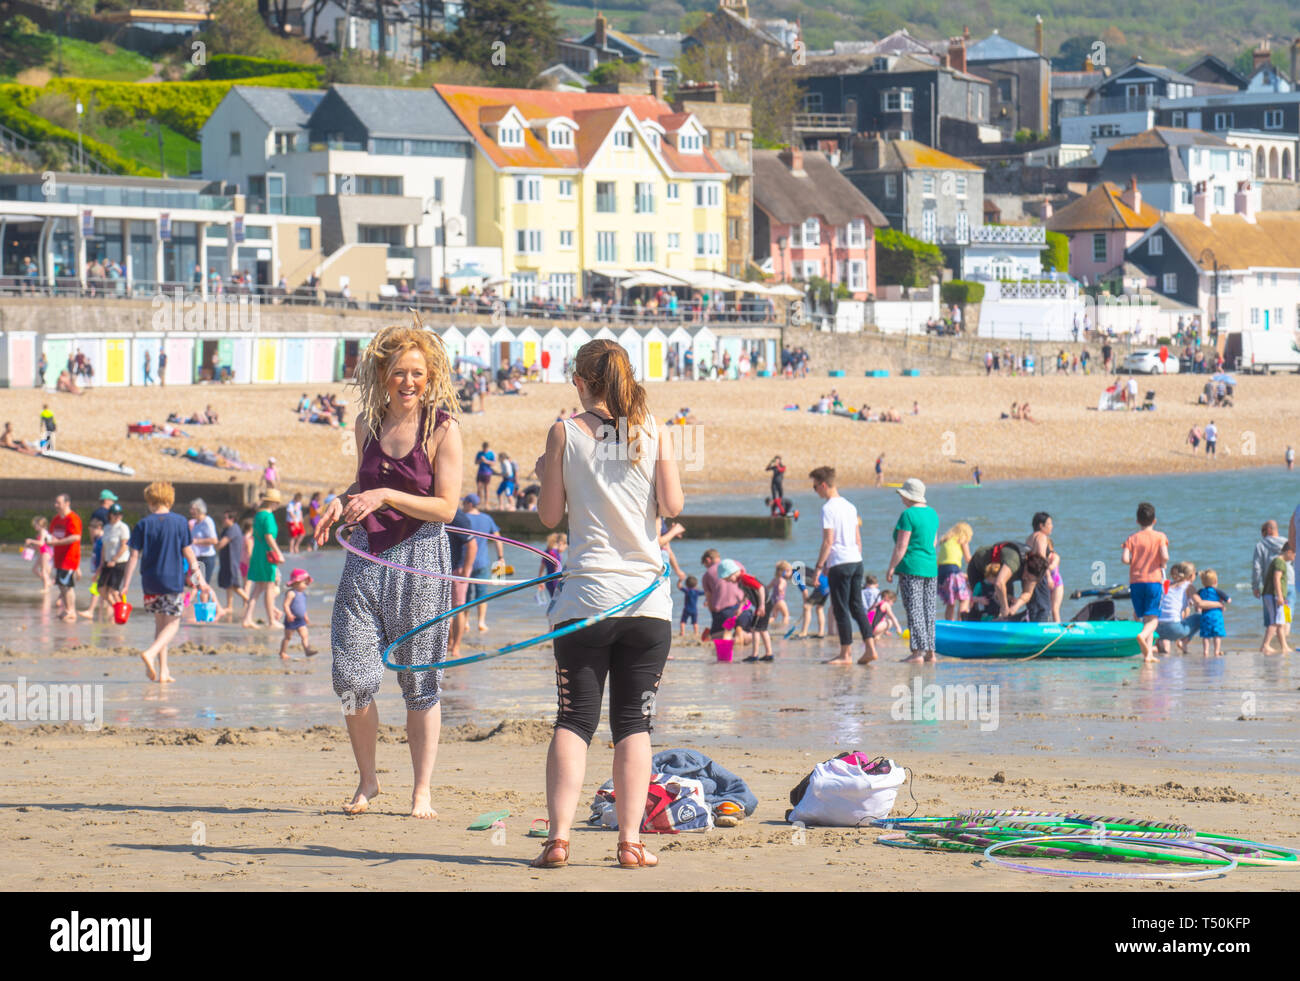 Lyme Regis, Dorset, UK. 20th April 2019. UK Weather: Holiday makers and beachgoers pack the pretty beach at the seaside resort of Lyme Regis to bask in sizzling hot Easter Saturday sunshine on the hottest day of the year so far.  Sunbathers enjoy bright blue skies as they soak up the sun in record breaking Easter Bank Holiday temperatures and the hottest Easter weekend for 70 years. The town's main beach is packed by 10.30 am. Credit: Celia McMahon/Alamy Live News. Stock Photo